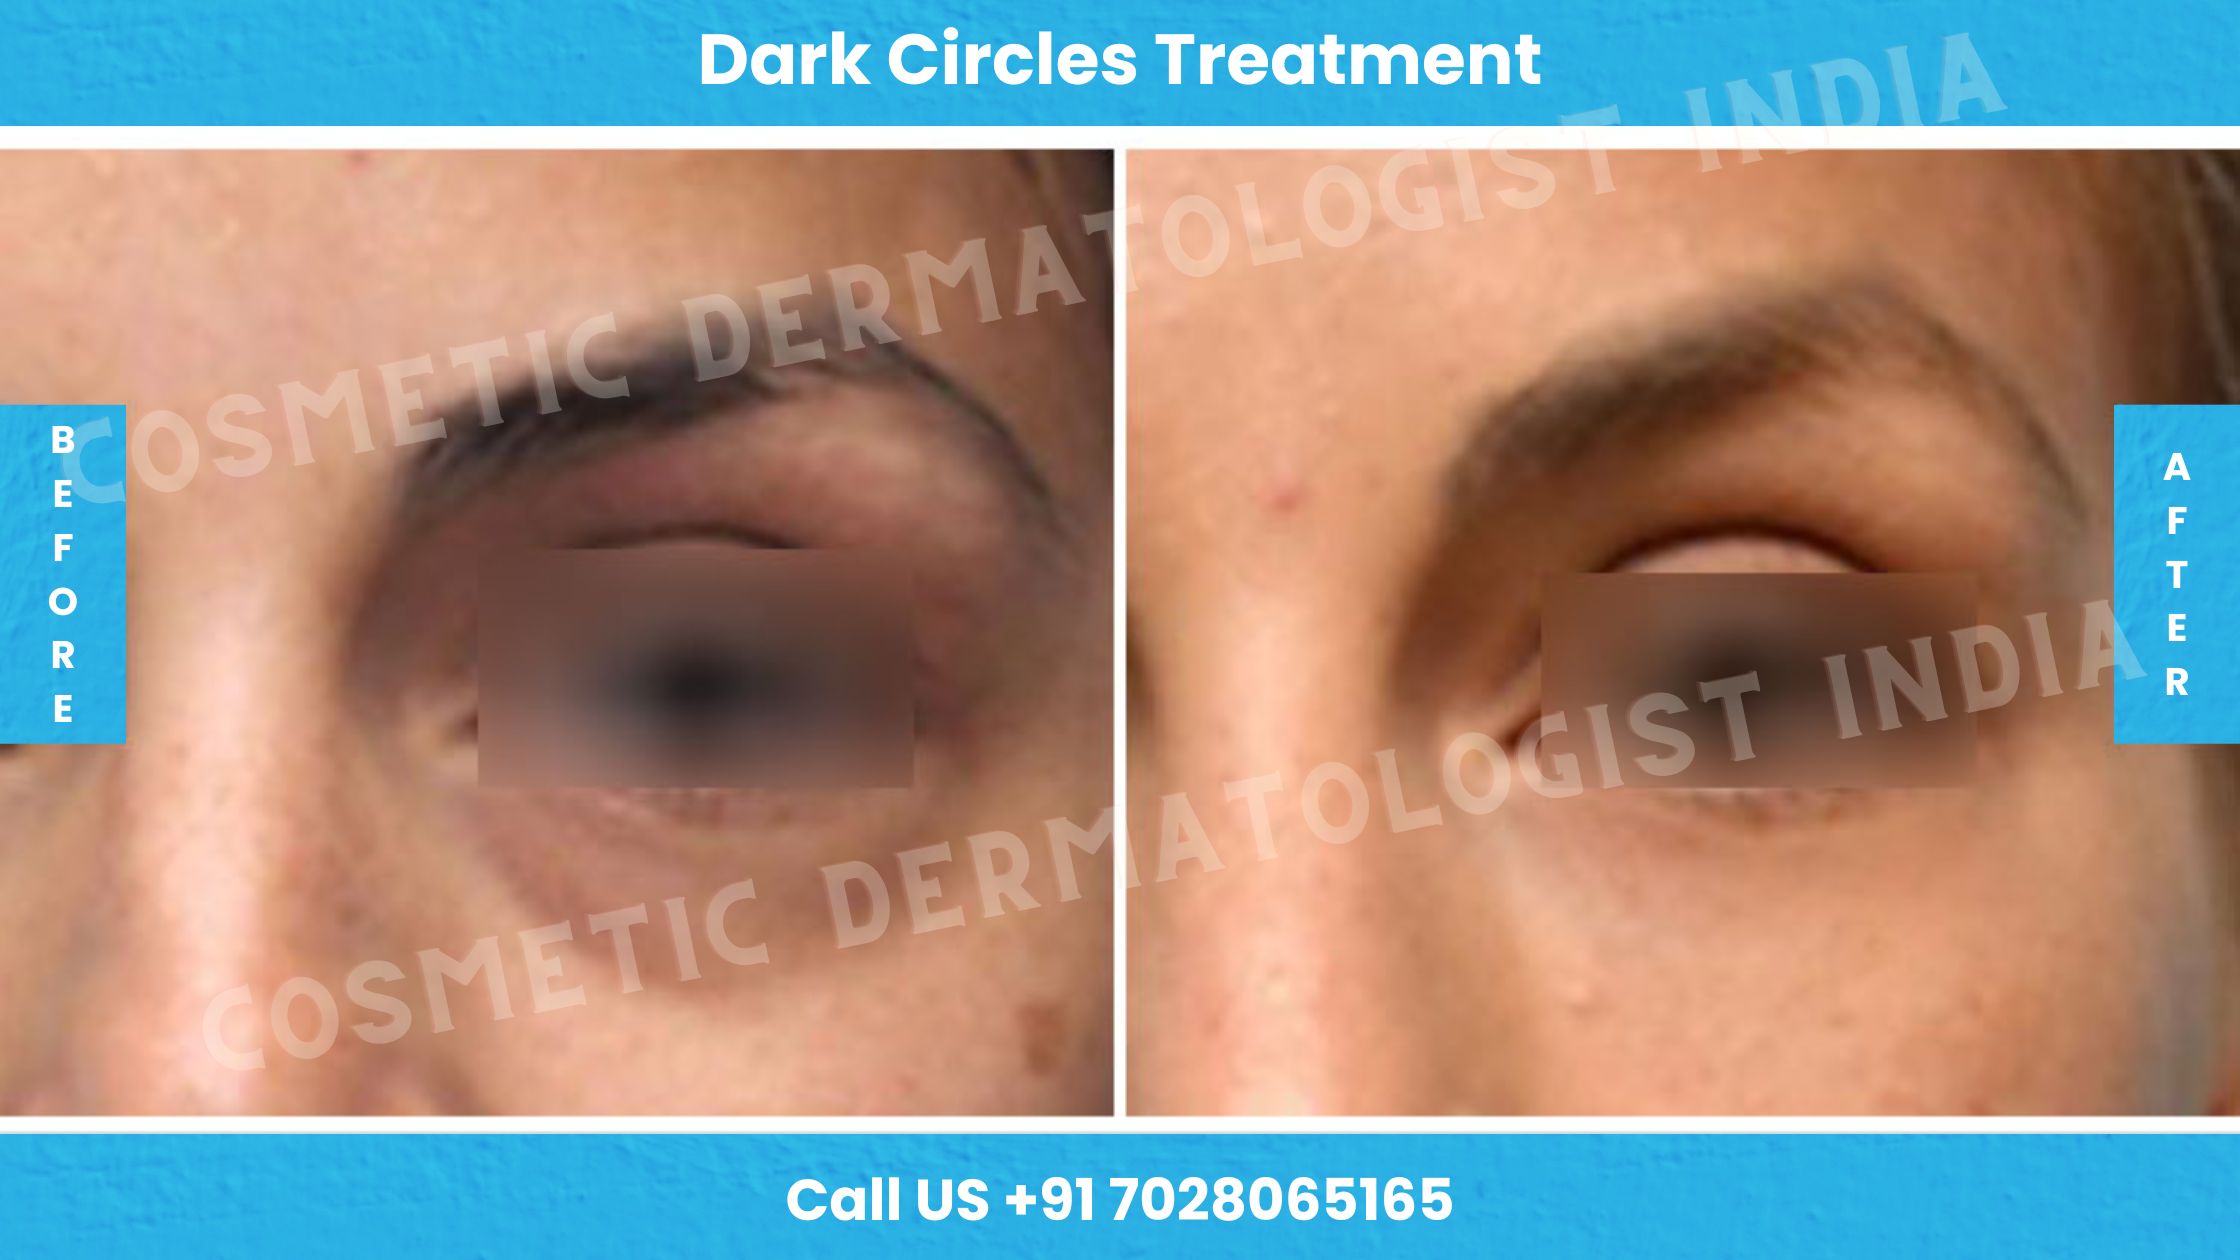 Before and After Images of Dark Circles Treatment